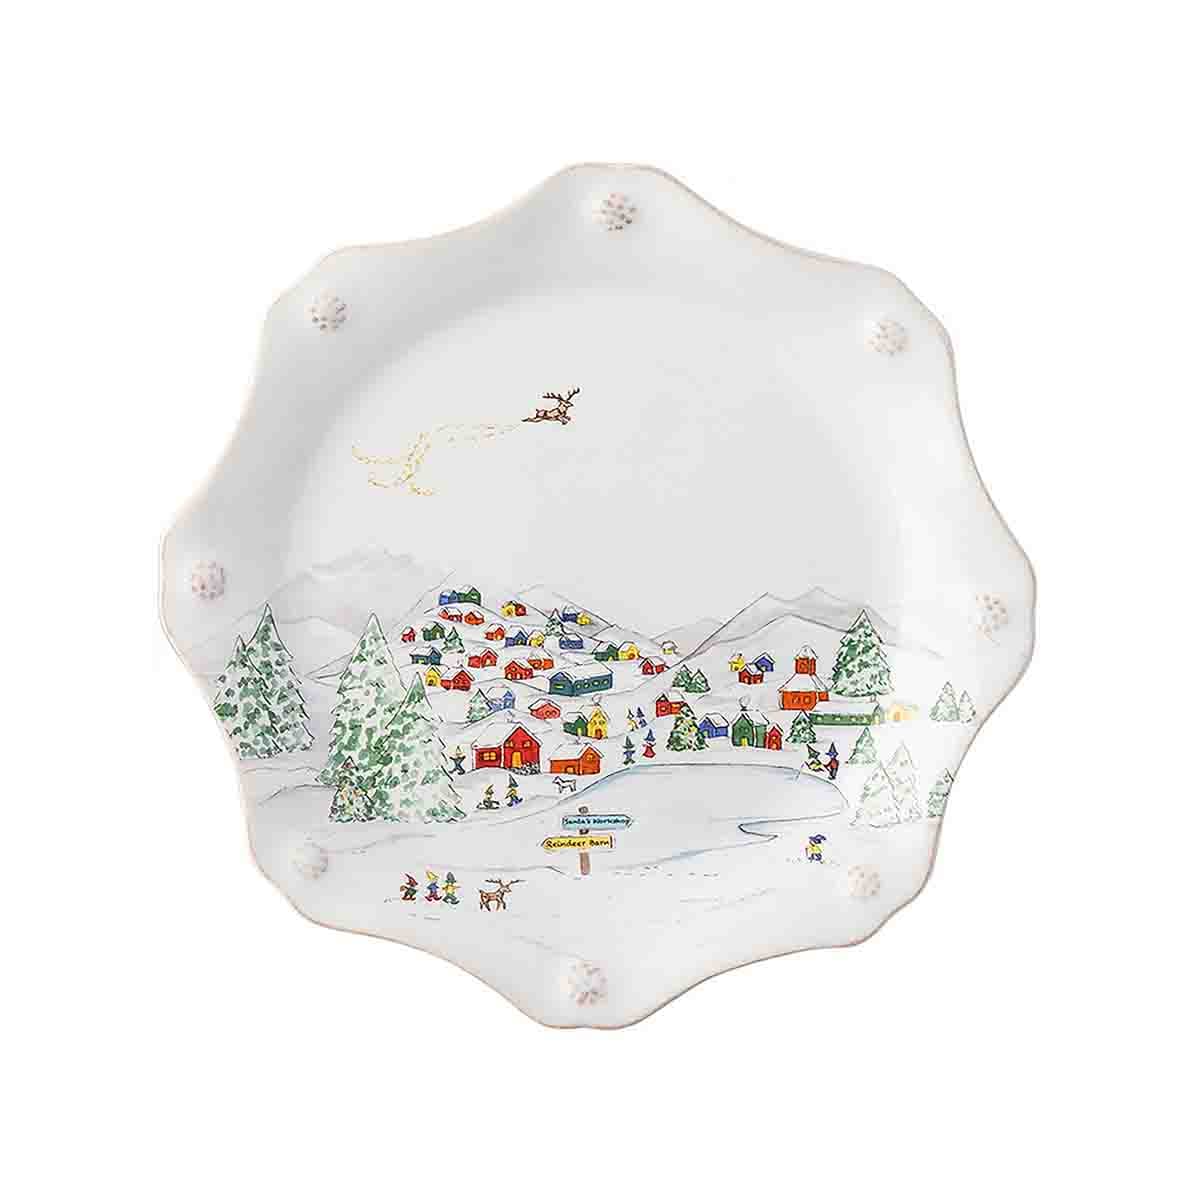 The magical world of the North Pole is illustrated atop our iconic Berry & Thread scalloped salad plate. Enjoy our whimsical depiction of the Elves Village, complete with Rudolph flying overhead. 